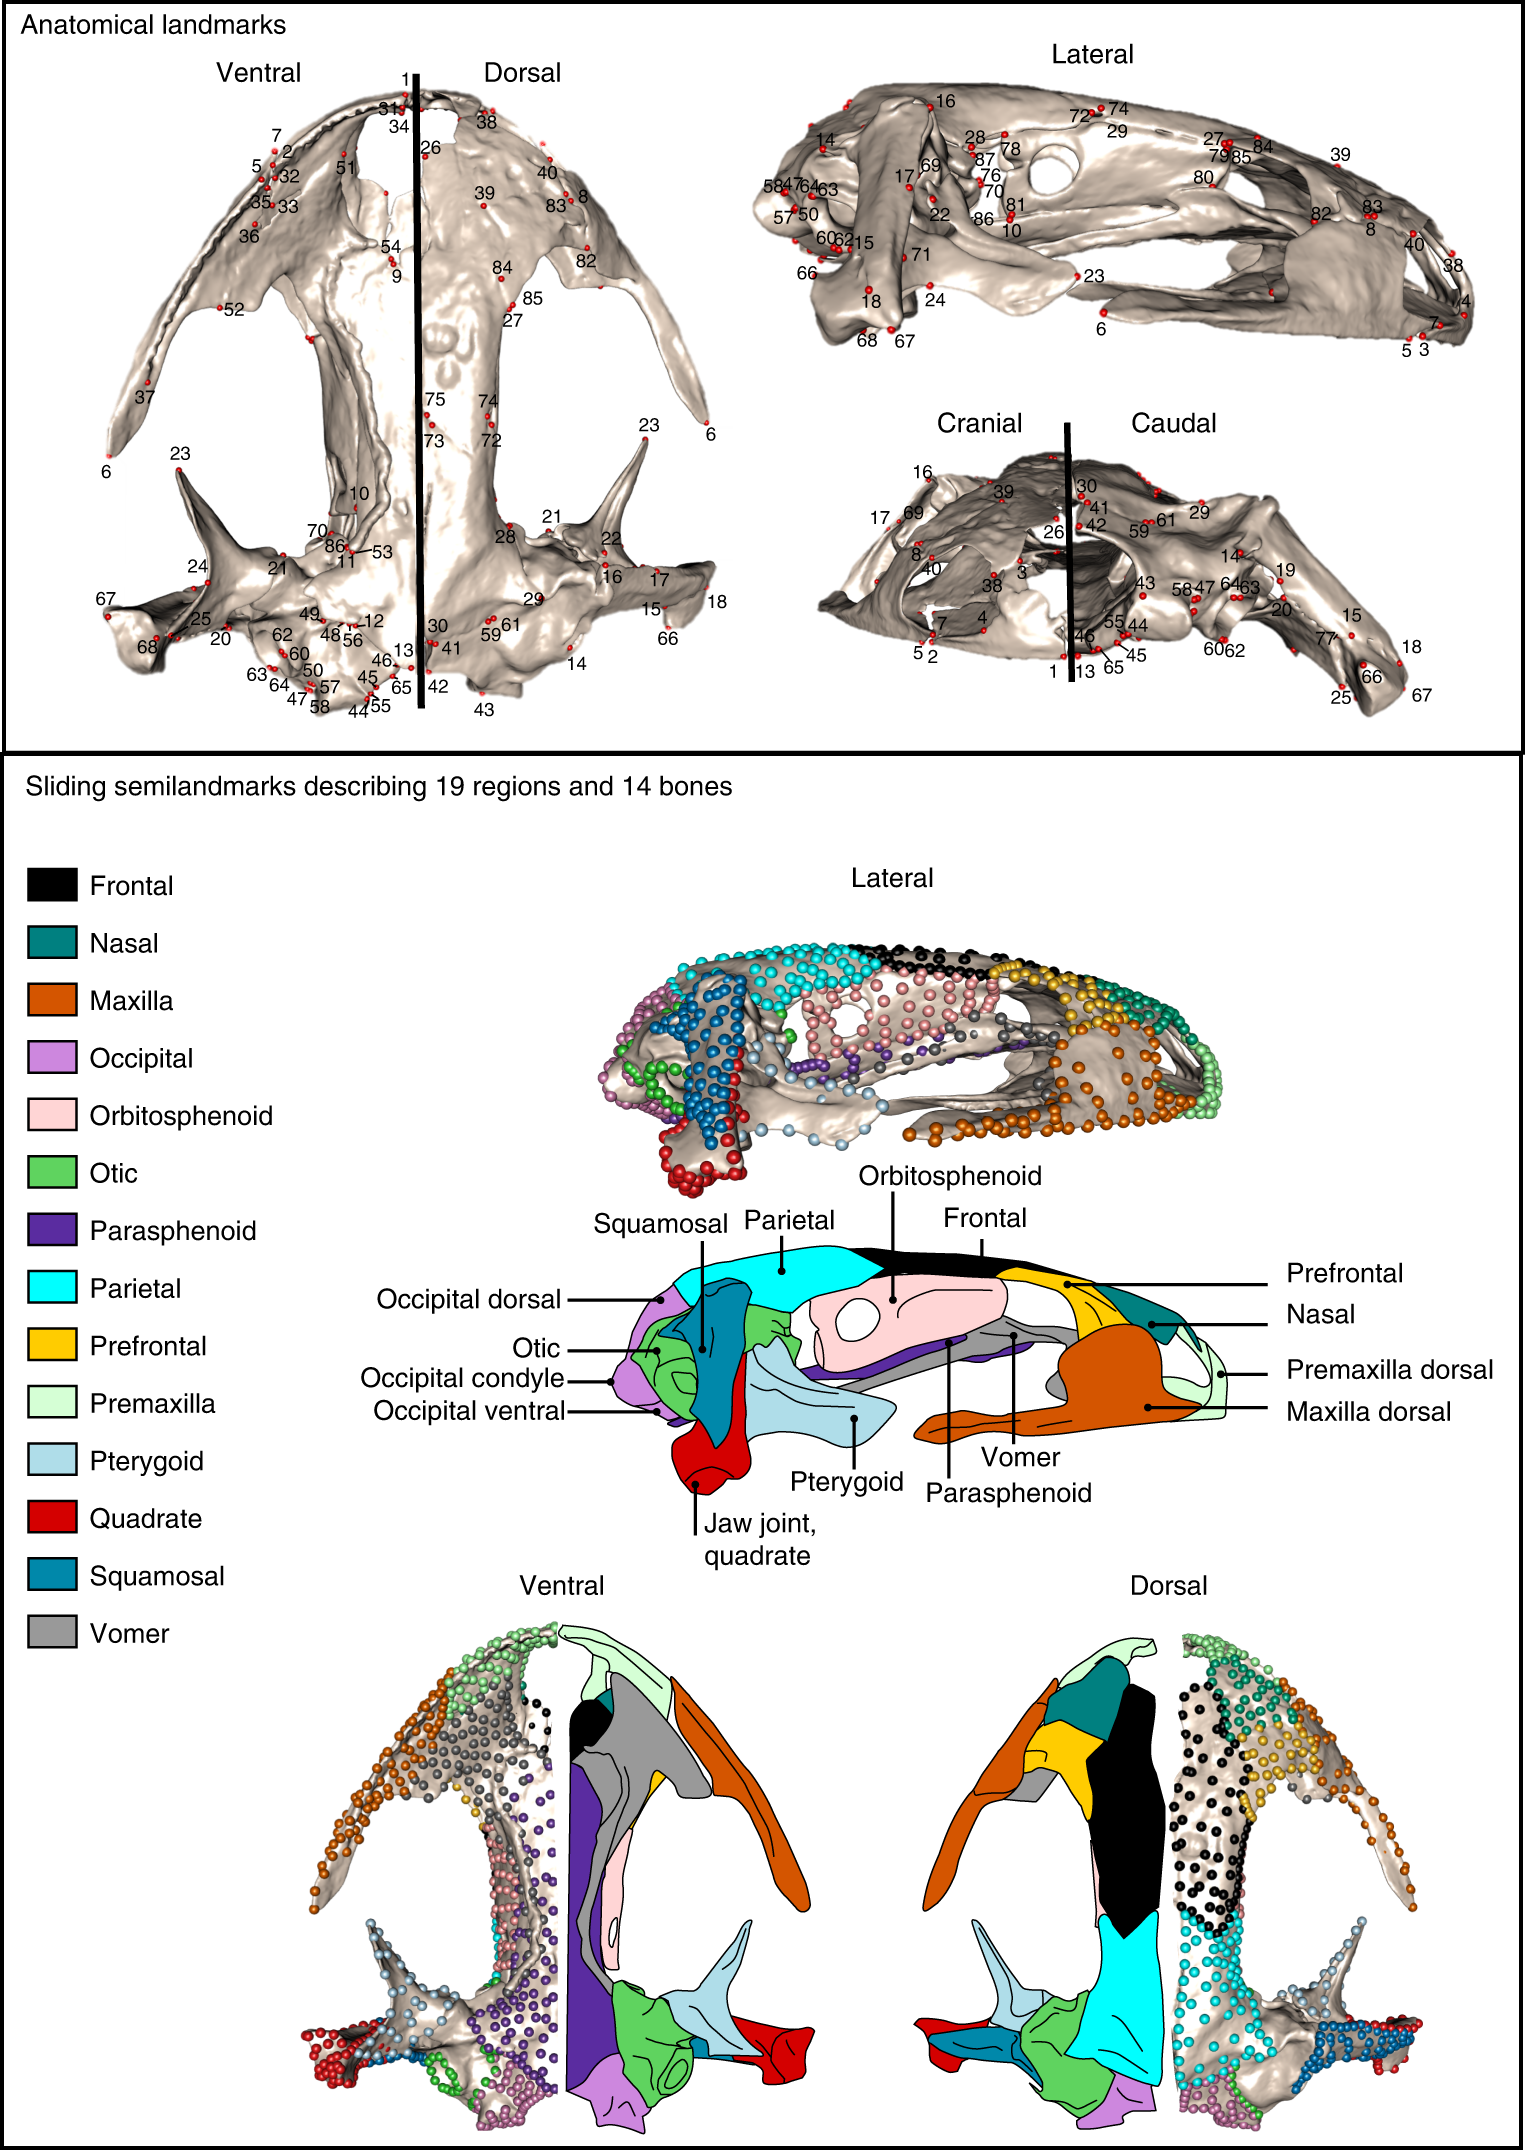 Frontiers  Common Patterns of Skull Bone Fusion and Their Potential to  Discriminate Different Ontogenetic Stages in Extant Birds